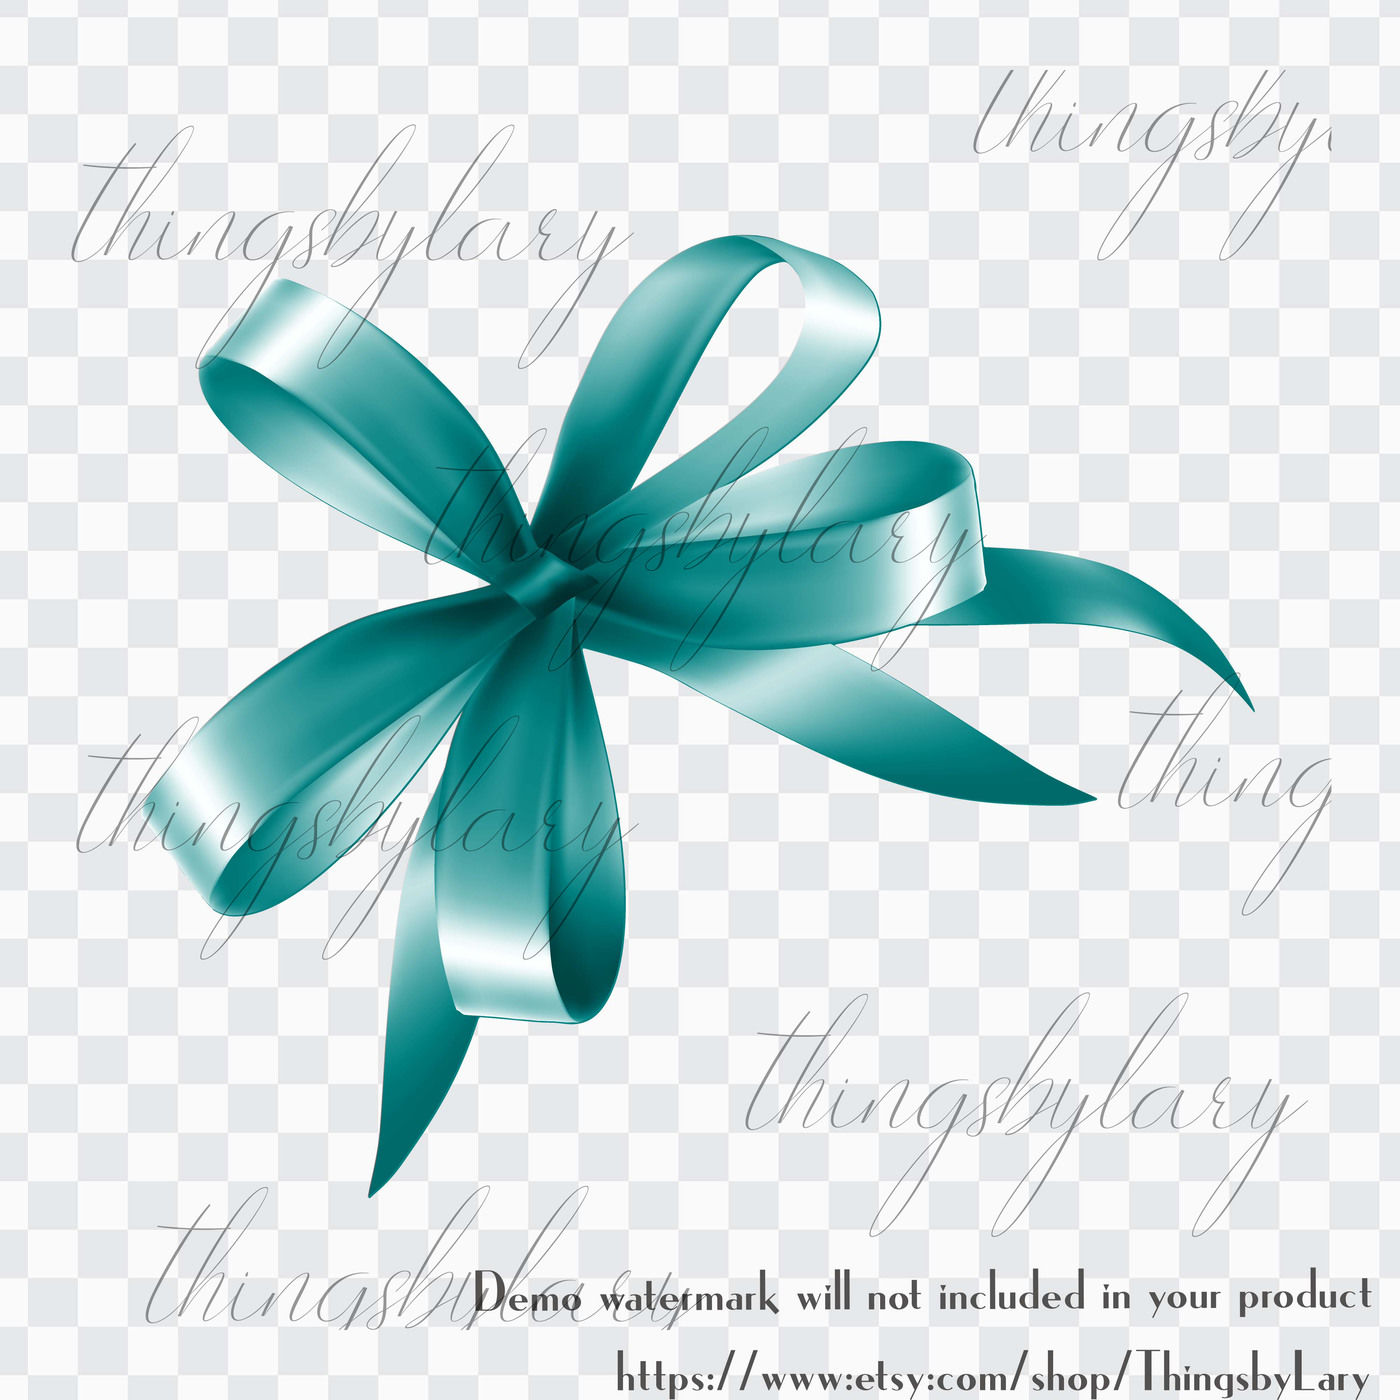 white tiffany bow png